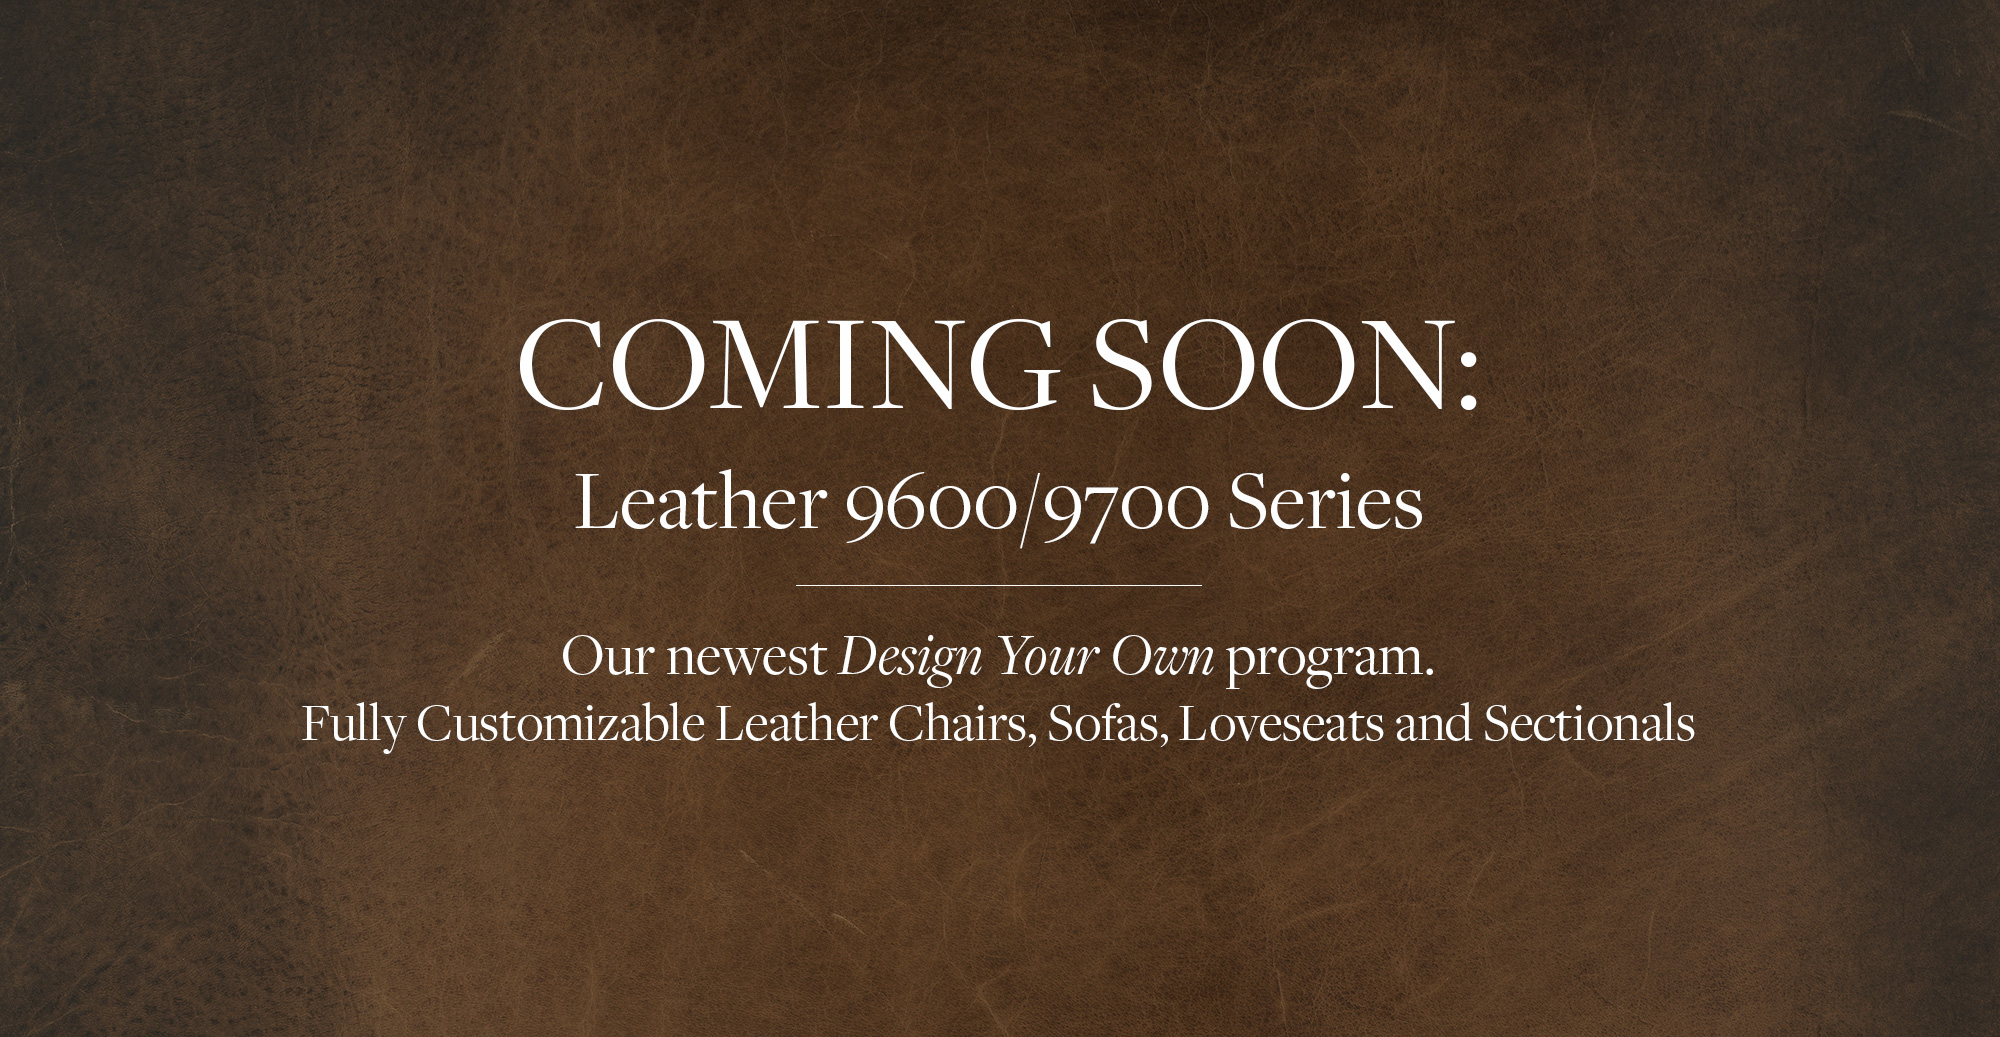 COMING SOON - Leather 9600/9700 Series - Fully Customizable Leather Chairs, Sofas, Loveseats and Sectionals